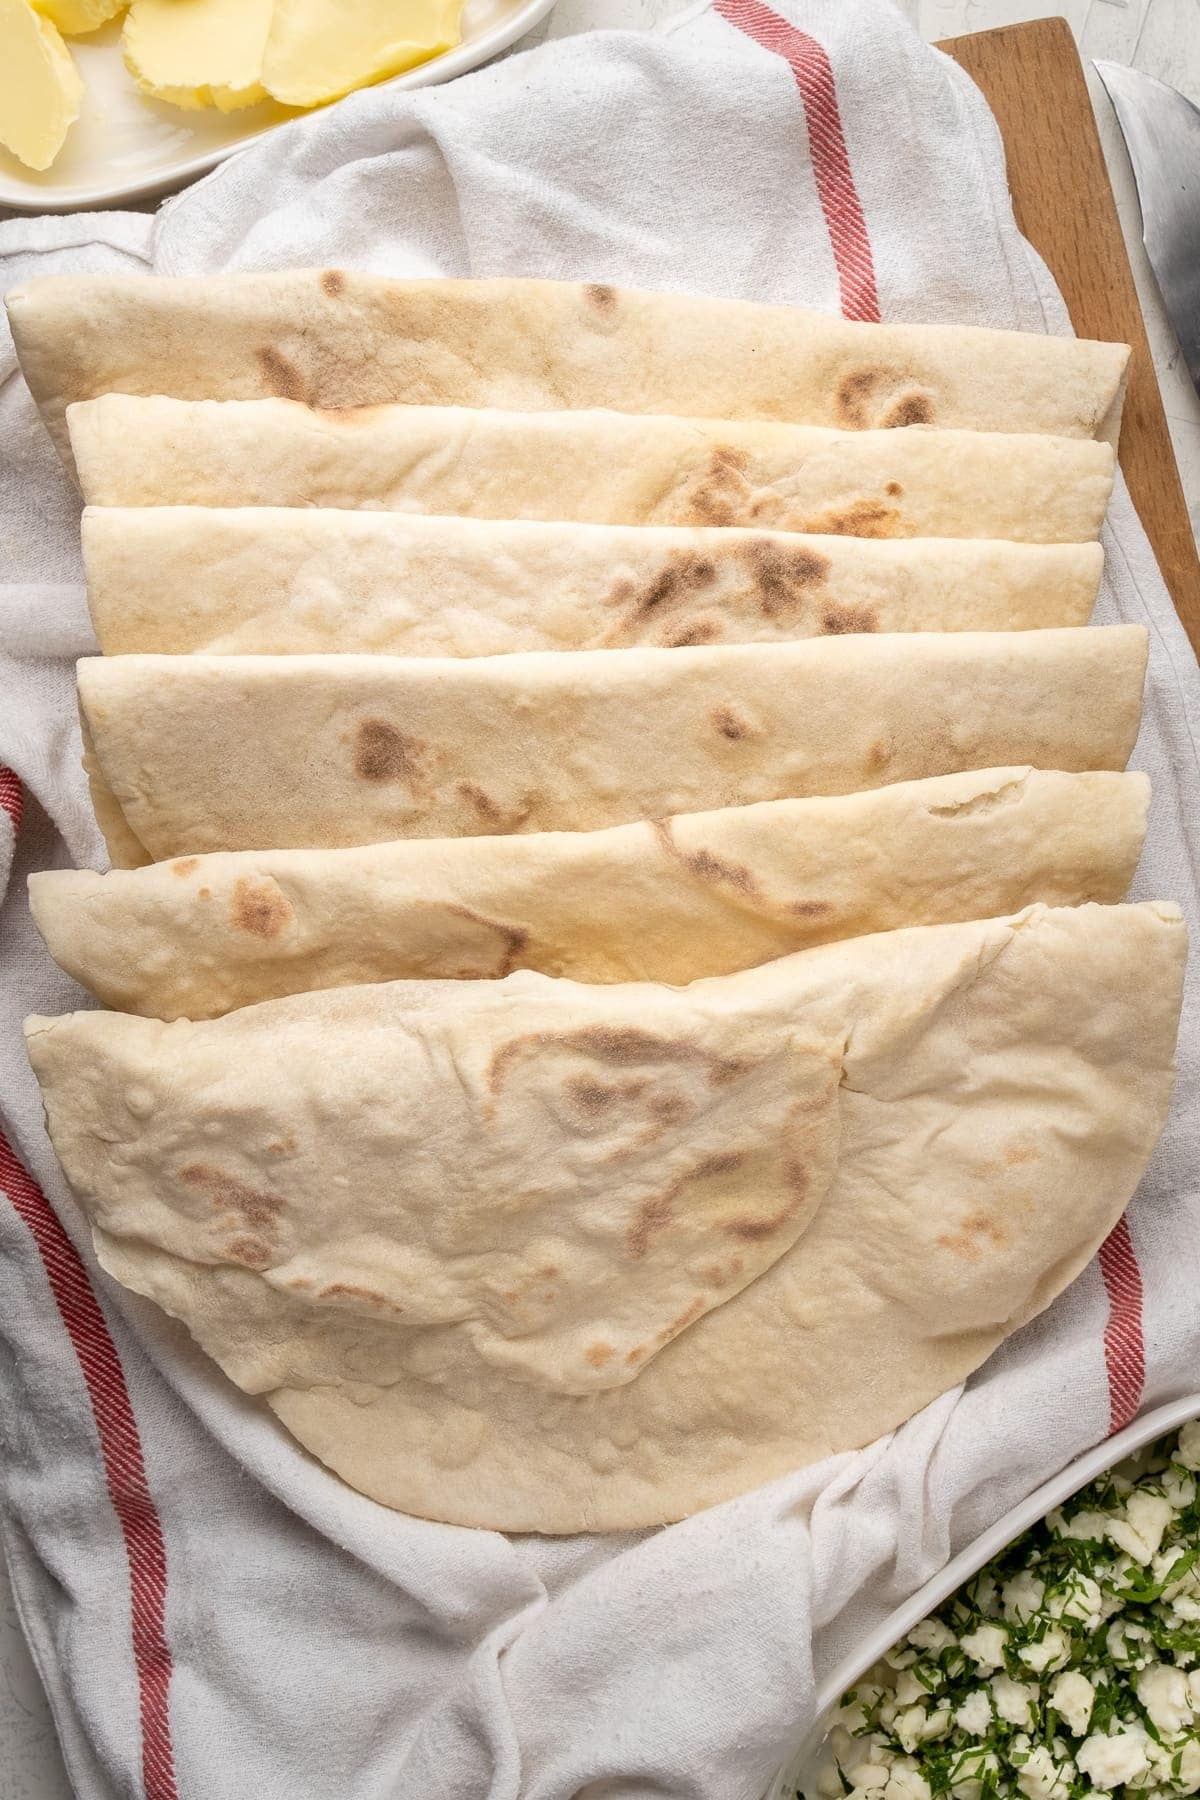 Lavash breads on a clean white kitchen towel. Butter on a white oval plate on the top and parsley and feta on another white oval plate at the bottom.